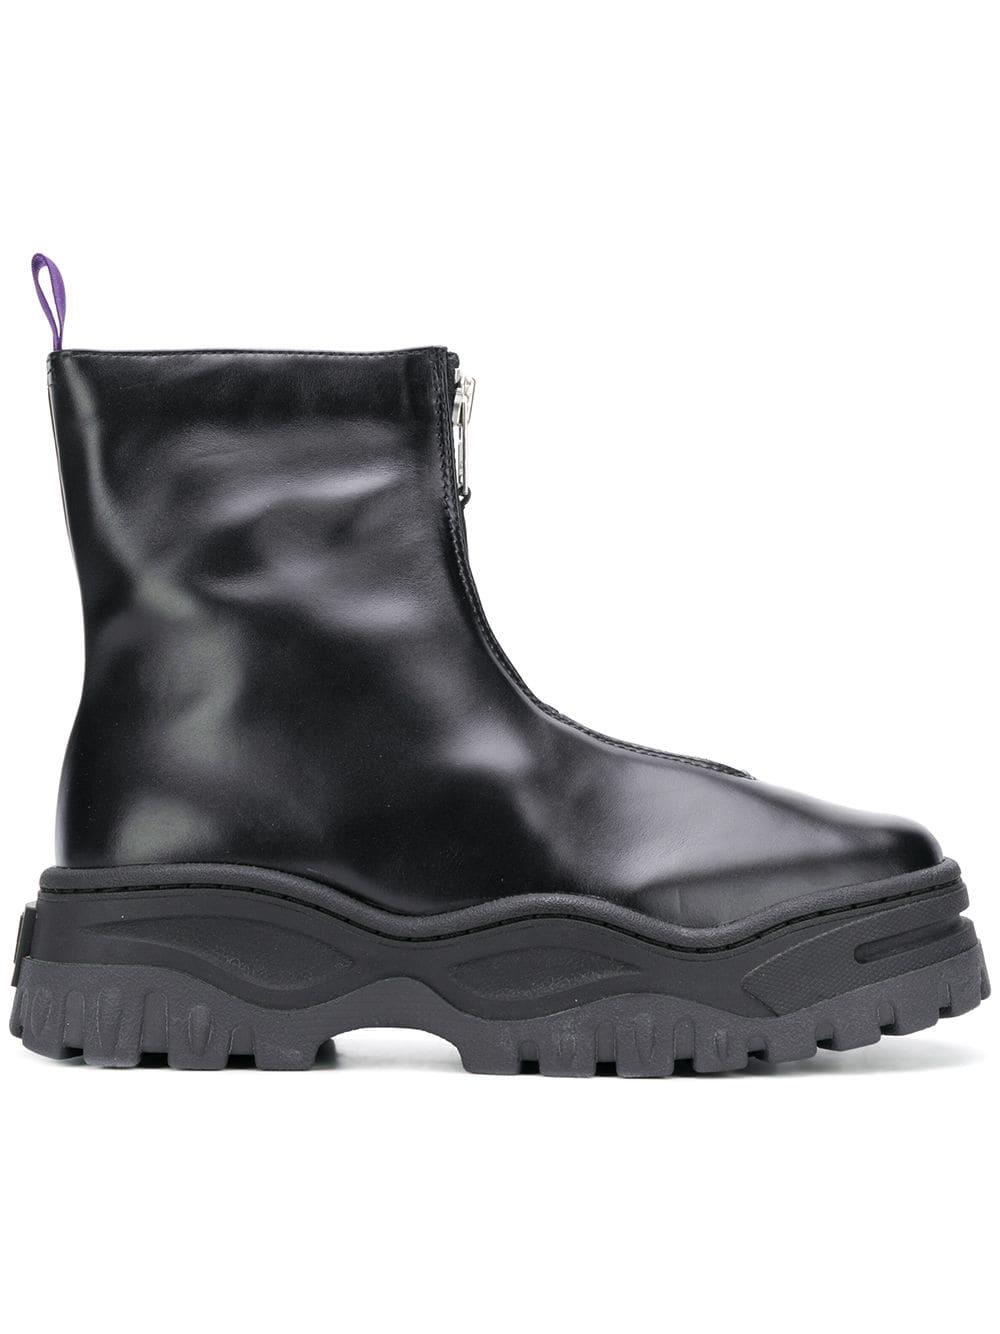 Eytys Raven Boots in Black for Men - Lyst